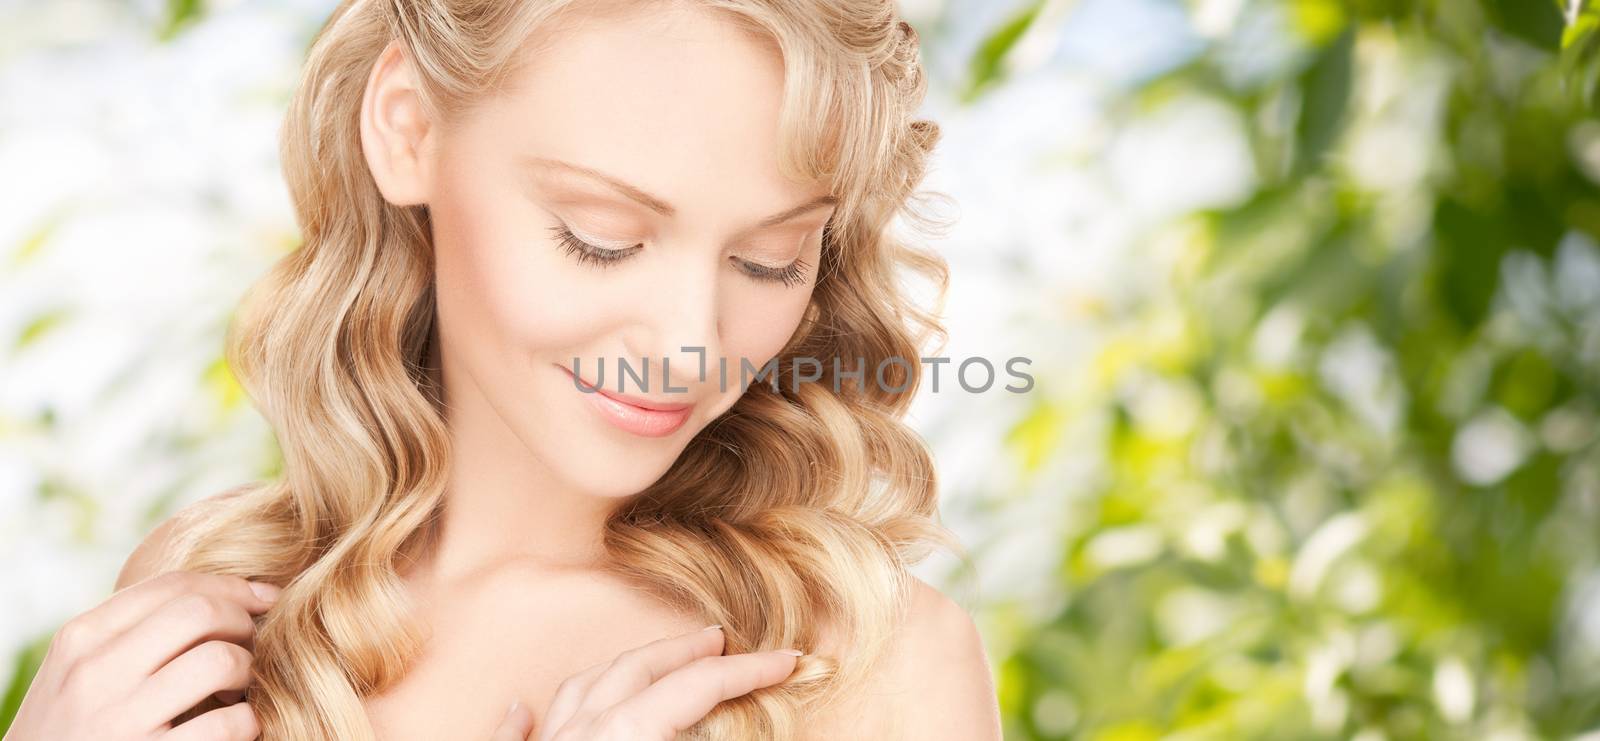 beauty, people, hair care and health concept - beautiful young woman face with long wavy hair over green background